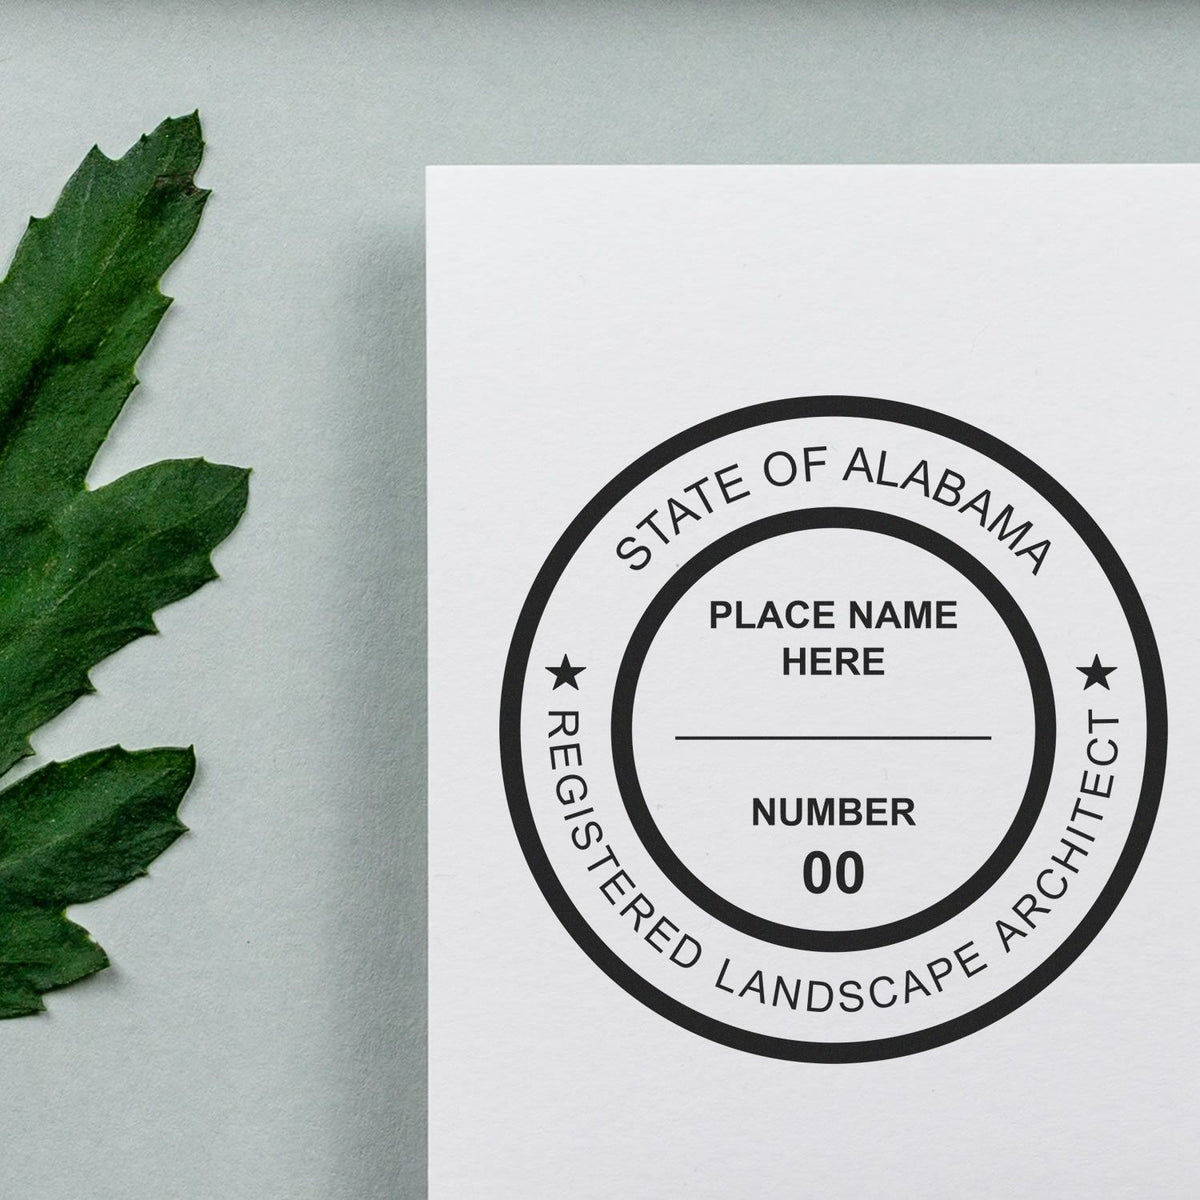 A stamped impression of the Self-Inking Alabama Landscape Architect Stamp in this stylish lifestyle photo, setting the tone for a unique and personalized product.